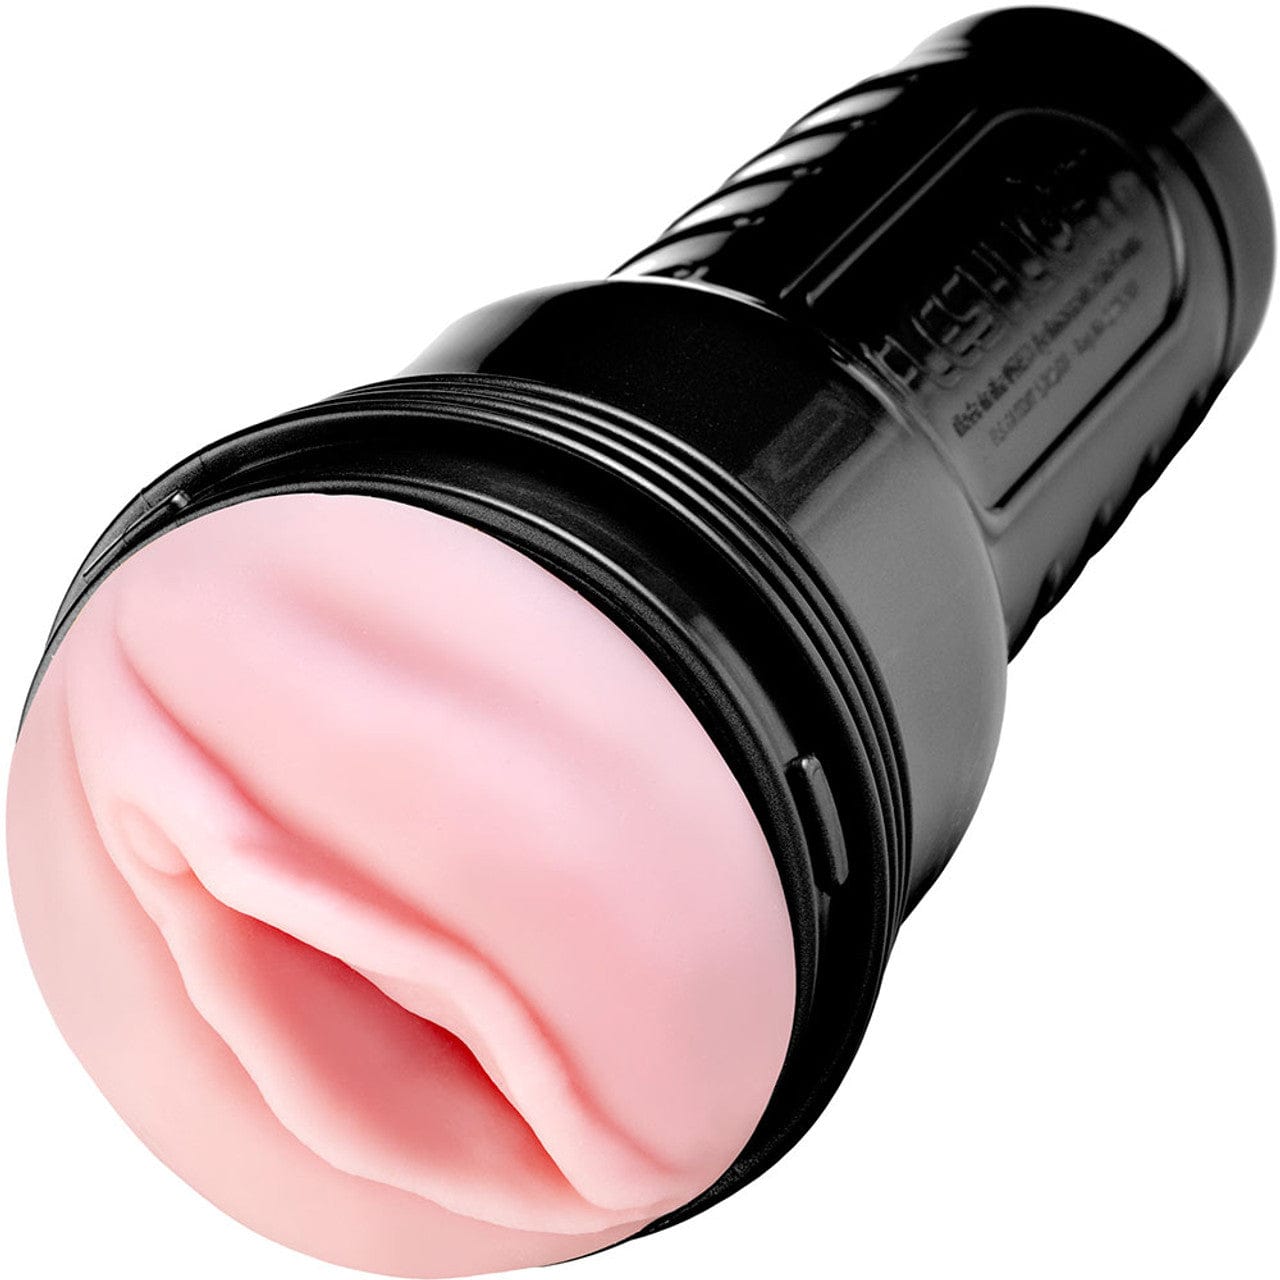 GUYS NEED LOVE TOO-VIBRATING MASTURBATING CUP BELLE EXOTICS-BLACK- TRINIDAD AND TOBAGO- Confidence and Passion with Belle Exotics Male Enhancers Collection - Unleash Desire in Trinidad and Tobago, Jamaica, Barbados, Guyana, Bahamas, USA, and Canada